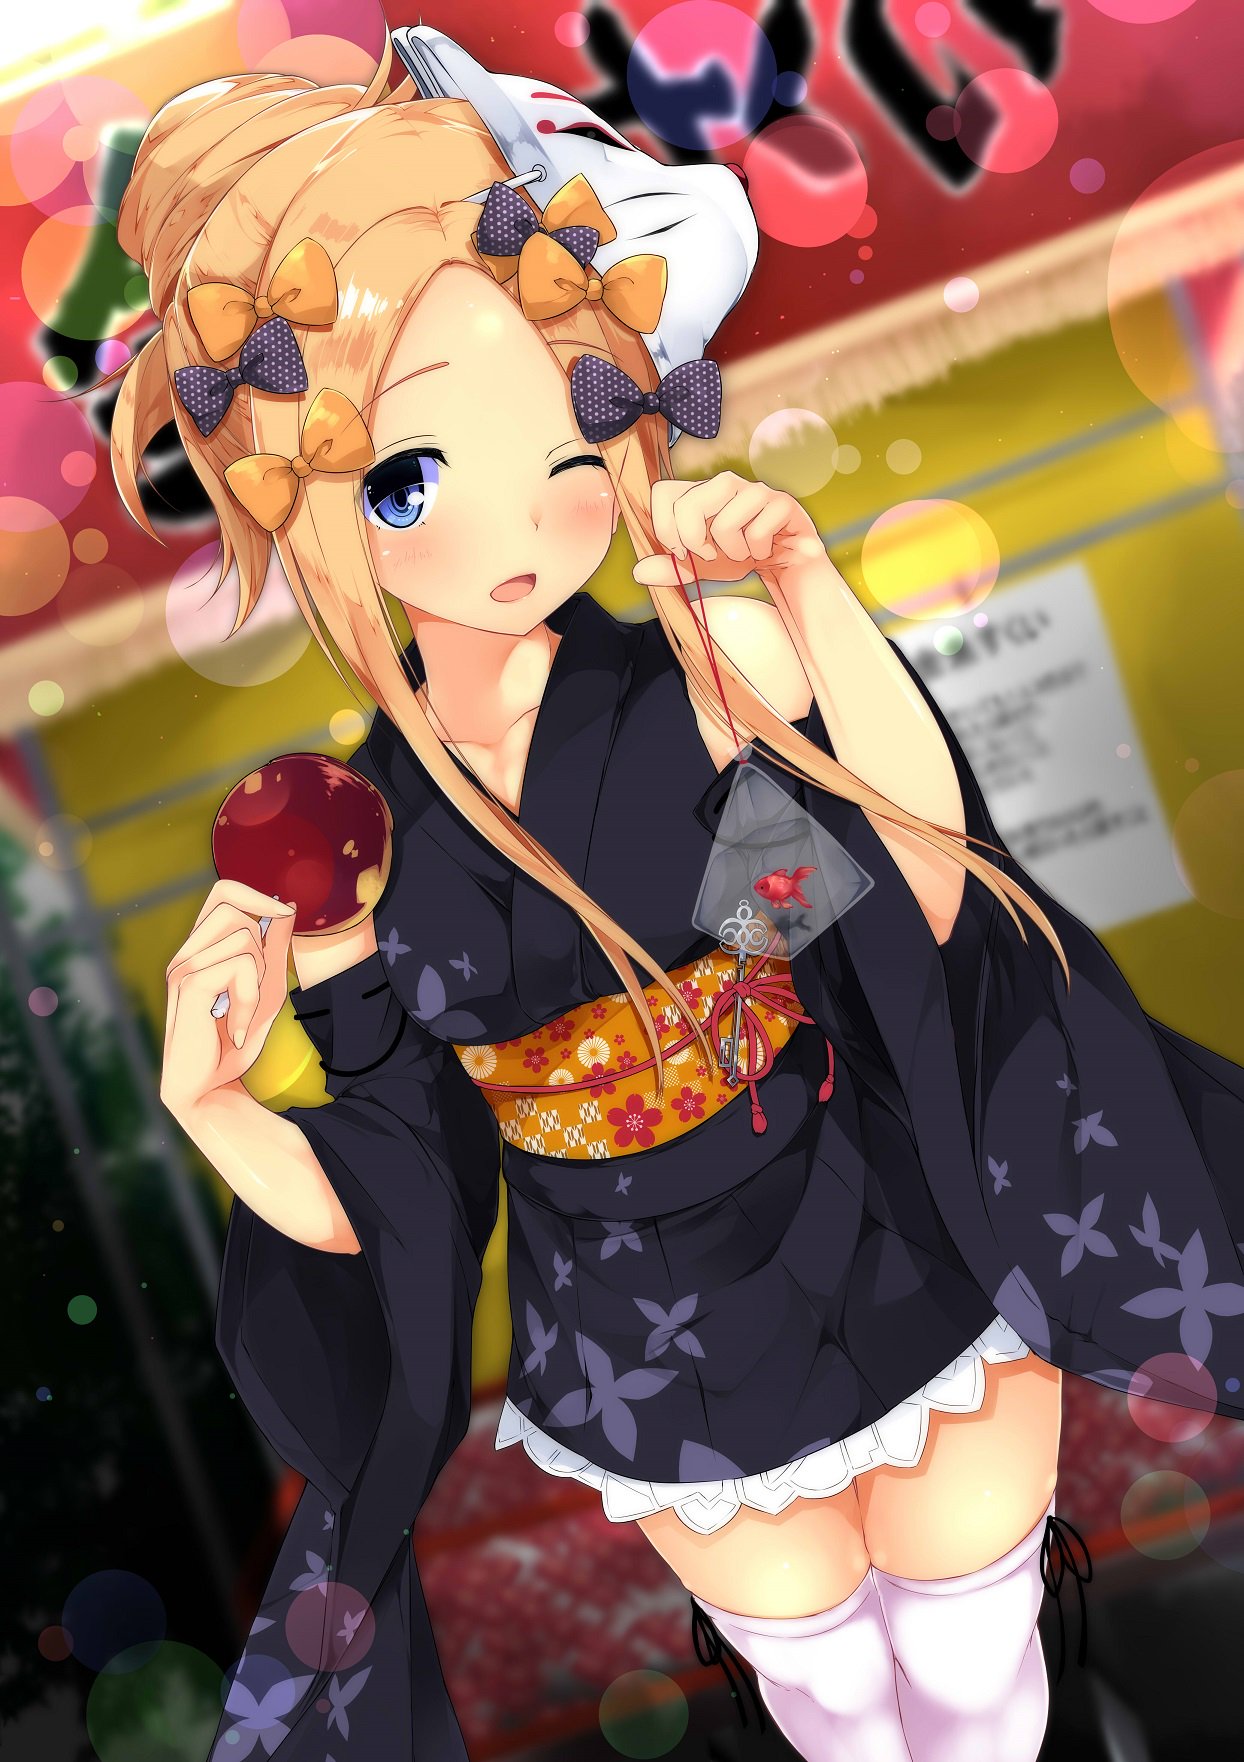 1girl abigail_williams_(fate/grand_order) alternate_costume alternate_hairstyle blonde_hair blush bow commentary_request detached_sleeves fan fate/grand_order fate_(series) hair_bow highres japanese_clothes key kimono looking_at_viewer mask obi one_eye_closed orange_bow polka_dot polka_dot_bow purple_bow sash short_kimono sidelocks sleeveless sleeveless_kimono solo thigh-highs tries white_legwear wide_sleeves